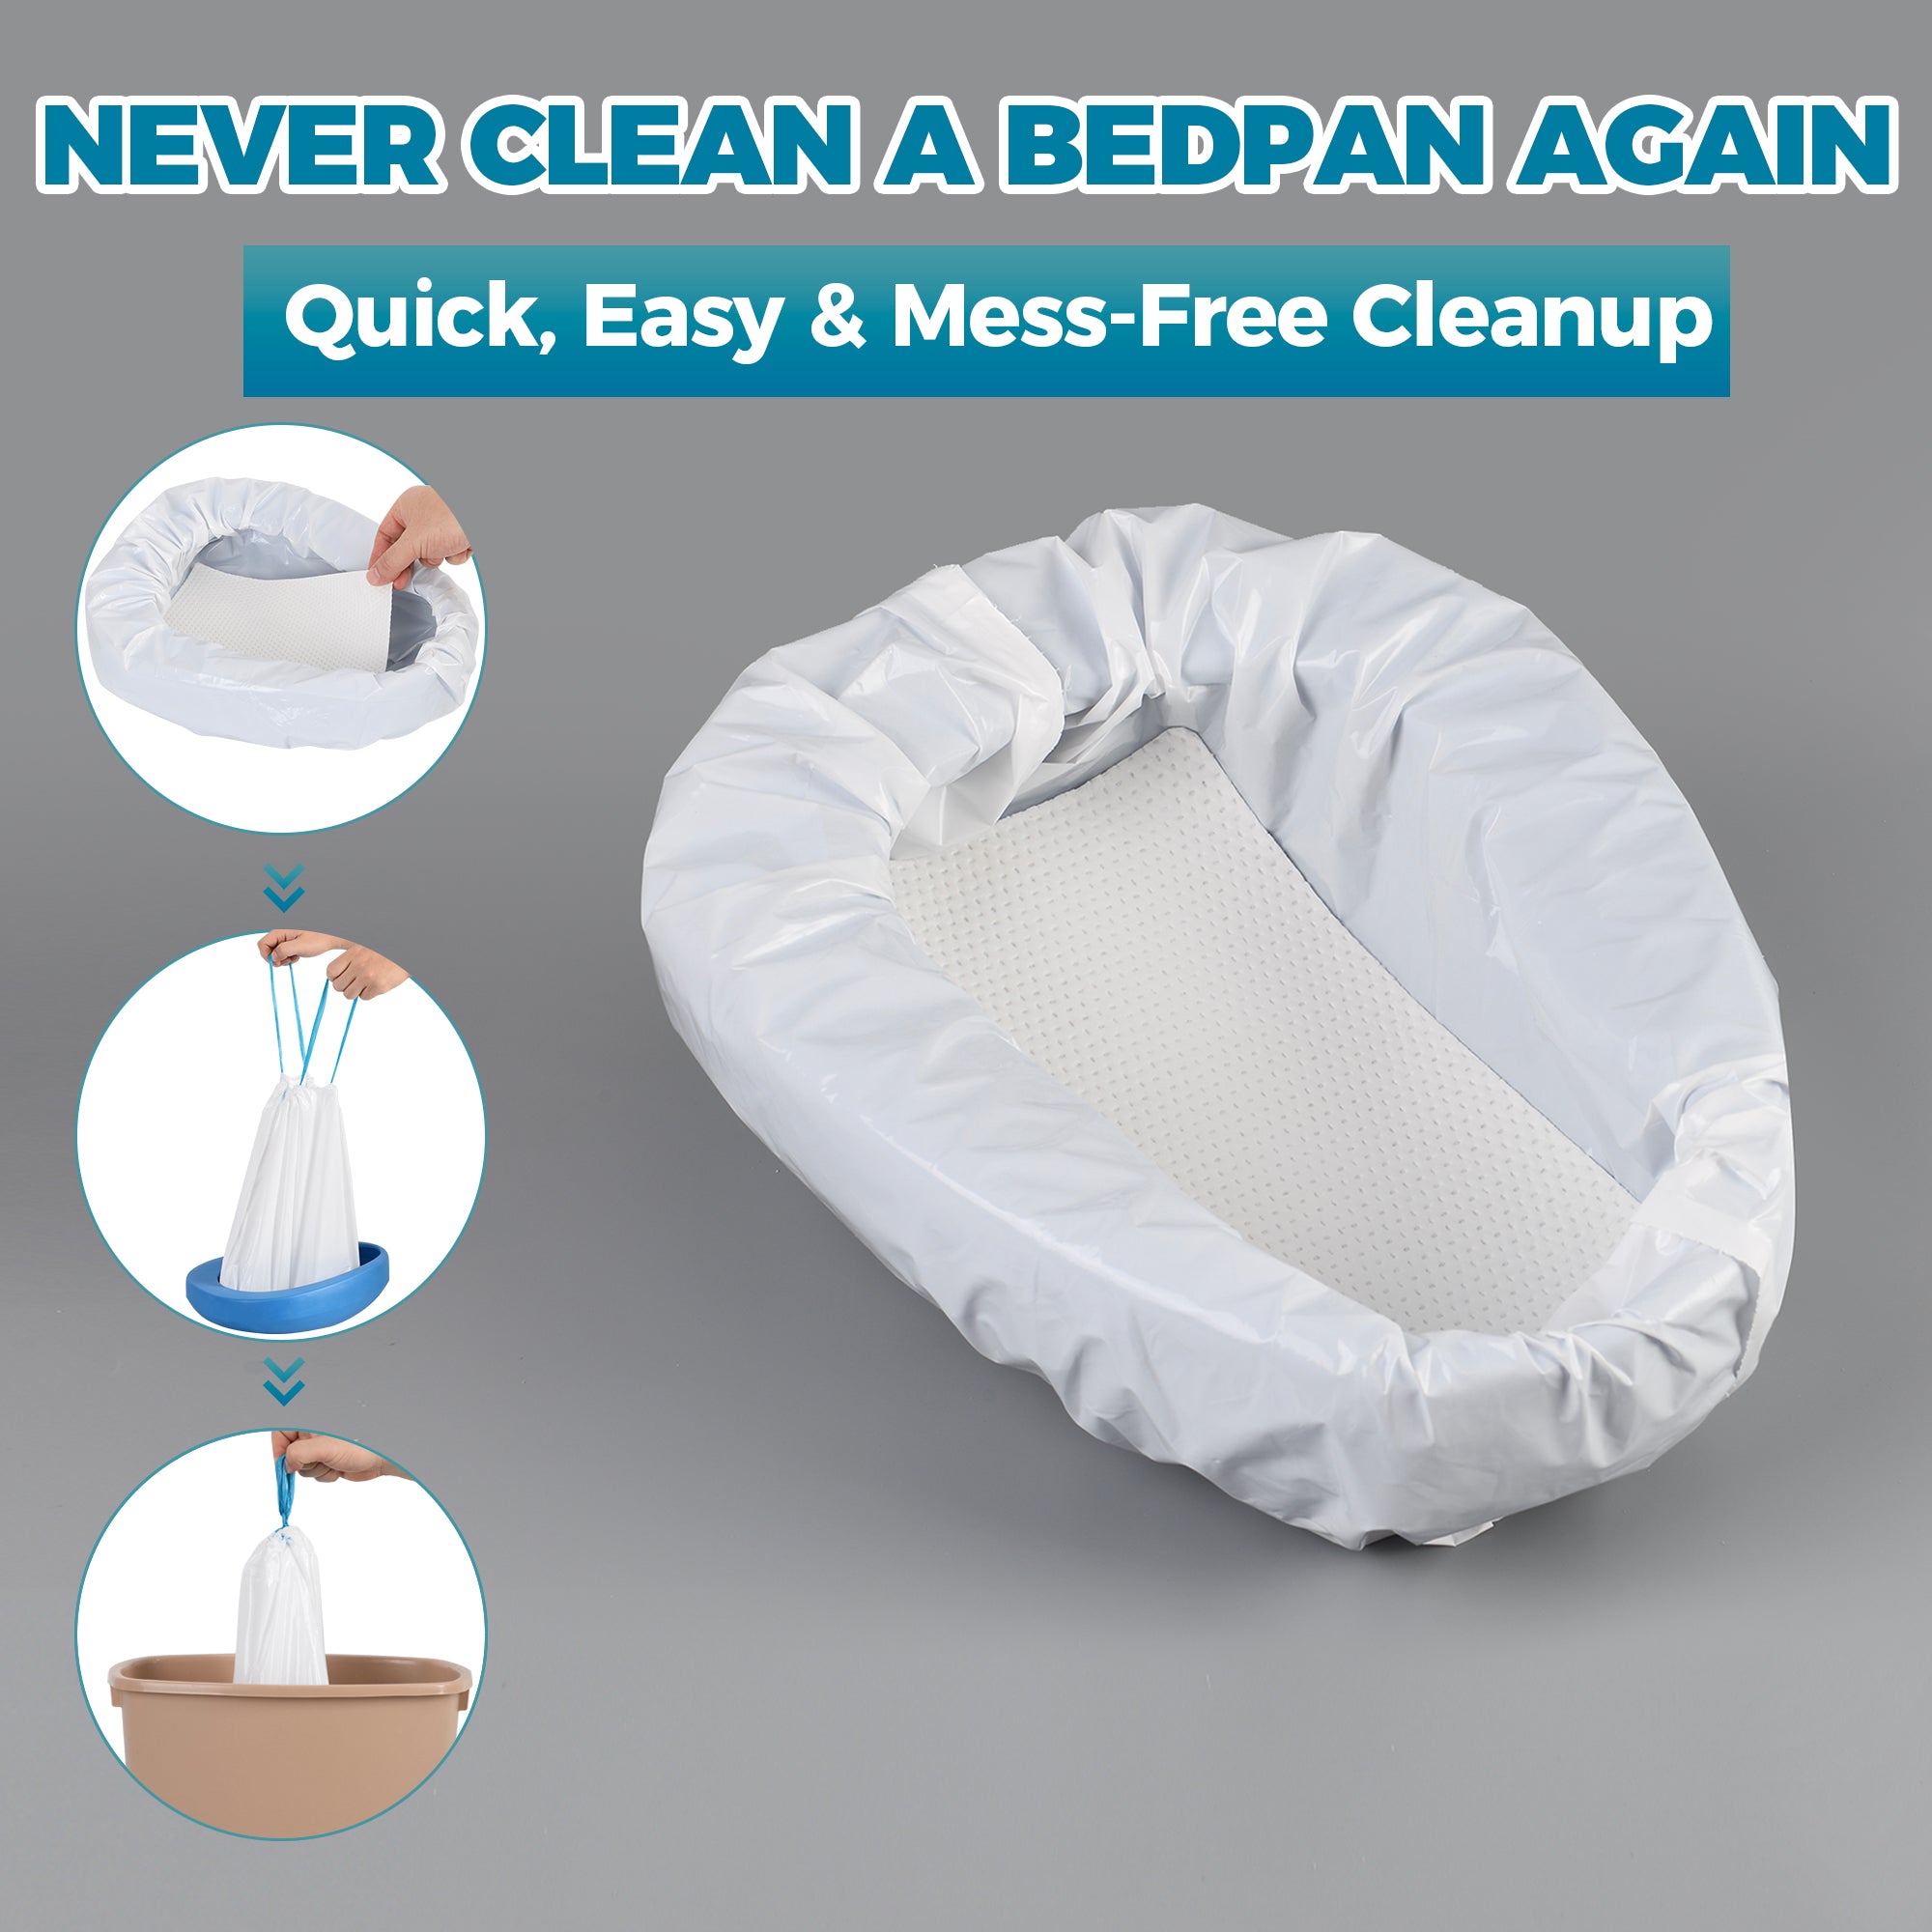 70 Pack Bedpan Liners Disposable Commode Liners with Absorbent Pads – Bedpans or Bedside Commode Bags – Bed Pan Liners for Elderly Females, Men, Women - Bed Pans Liner Nursing Homes and Hospitals